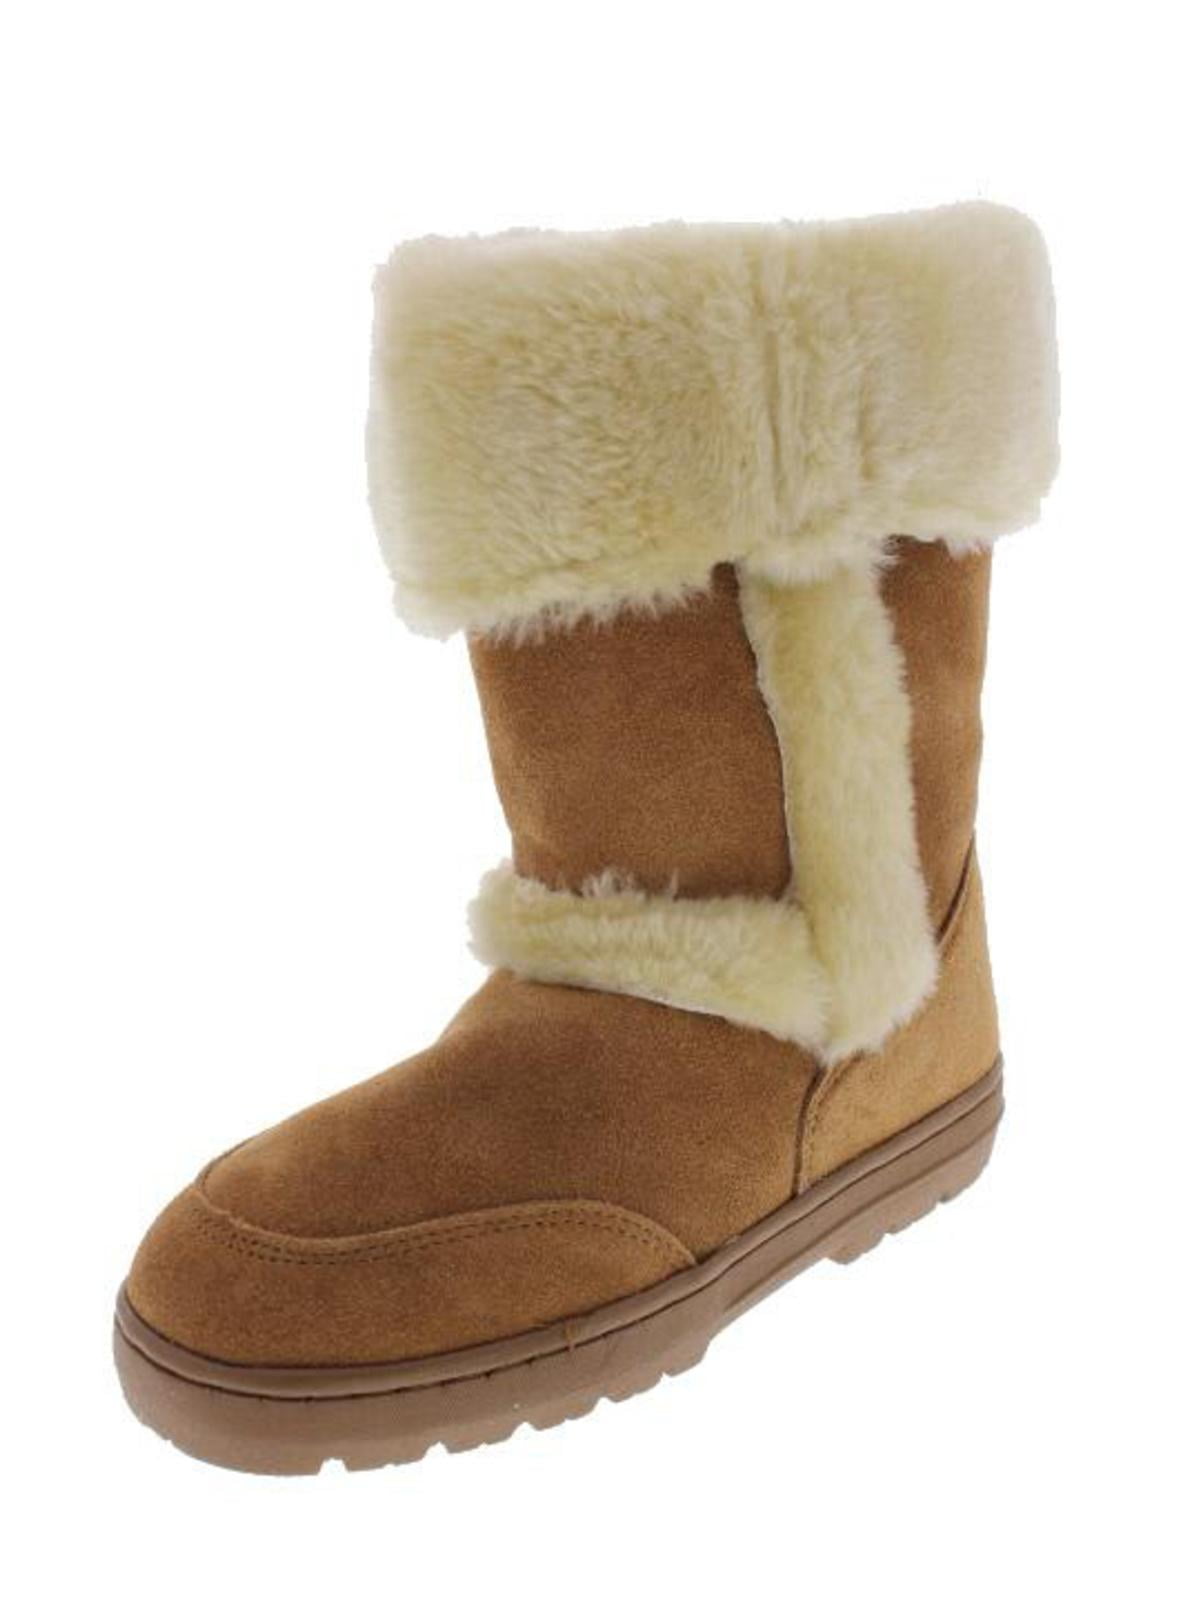 Style & Co. Womens Witty Suede Faux Fur Casual Boots Tan 11